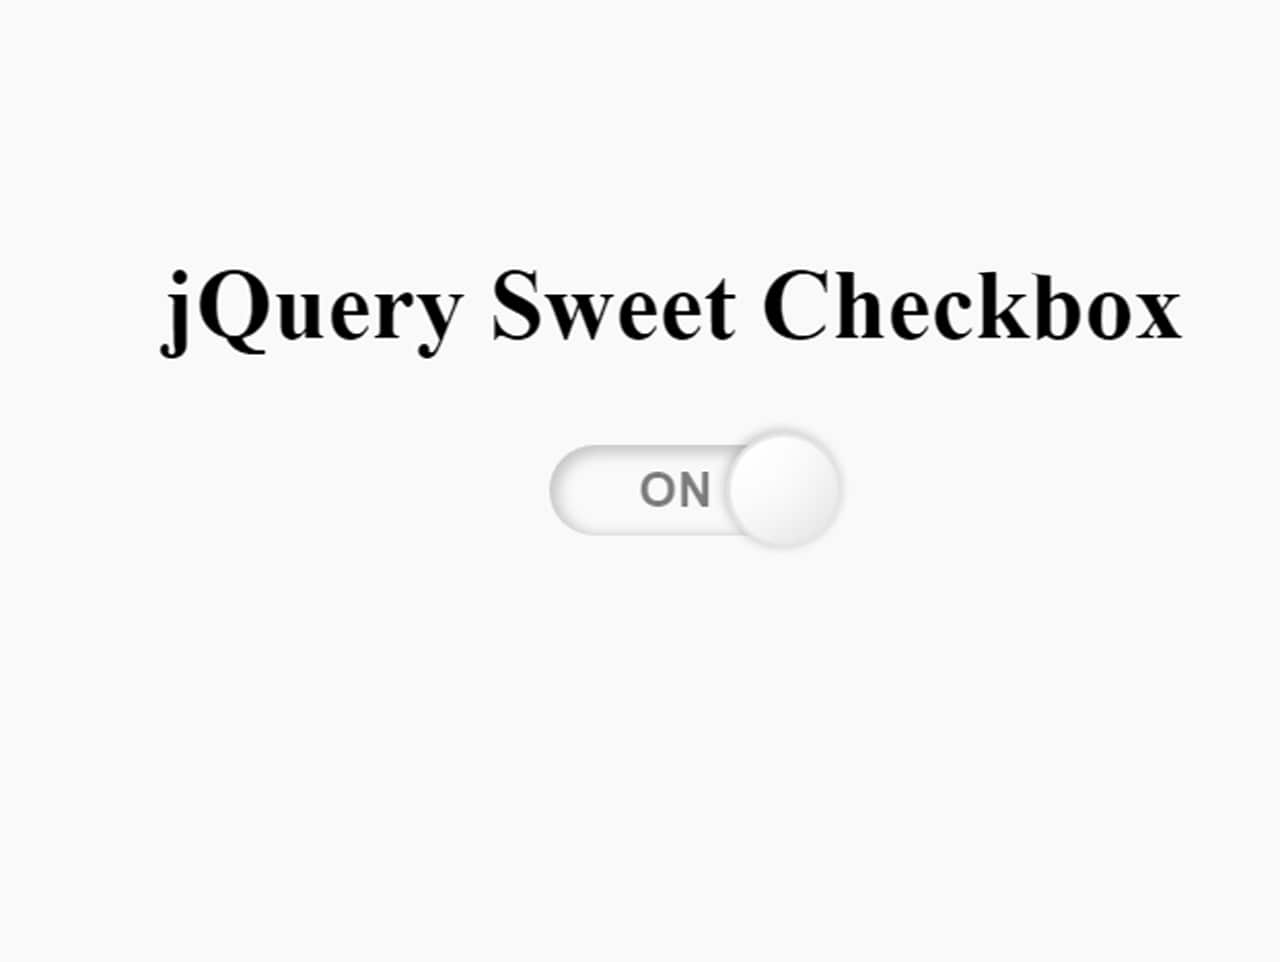 HTML Toggle Switch with Text - jQuery Sweet Checkbox